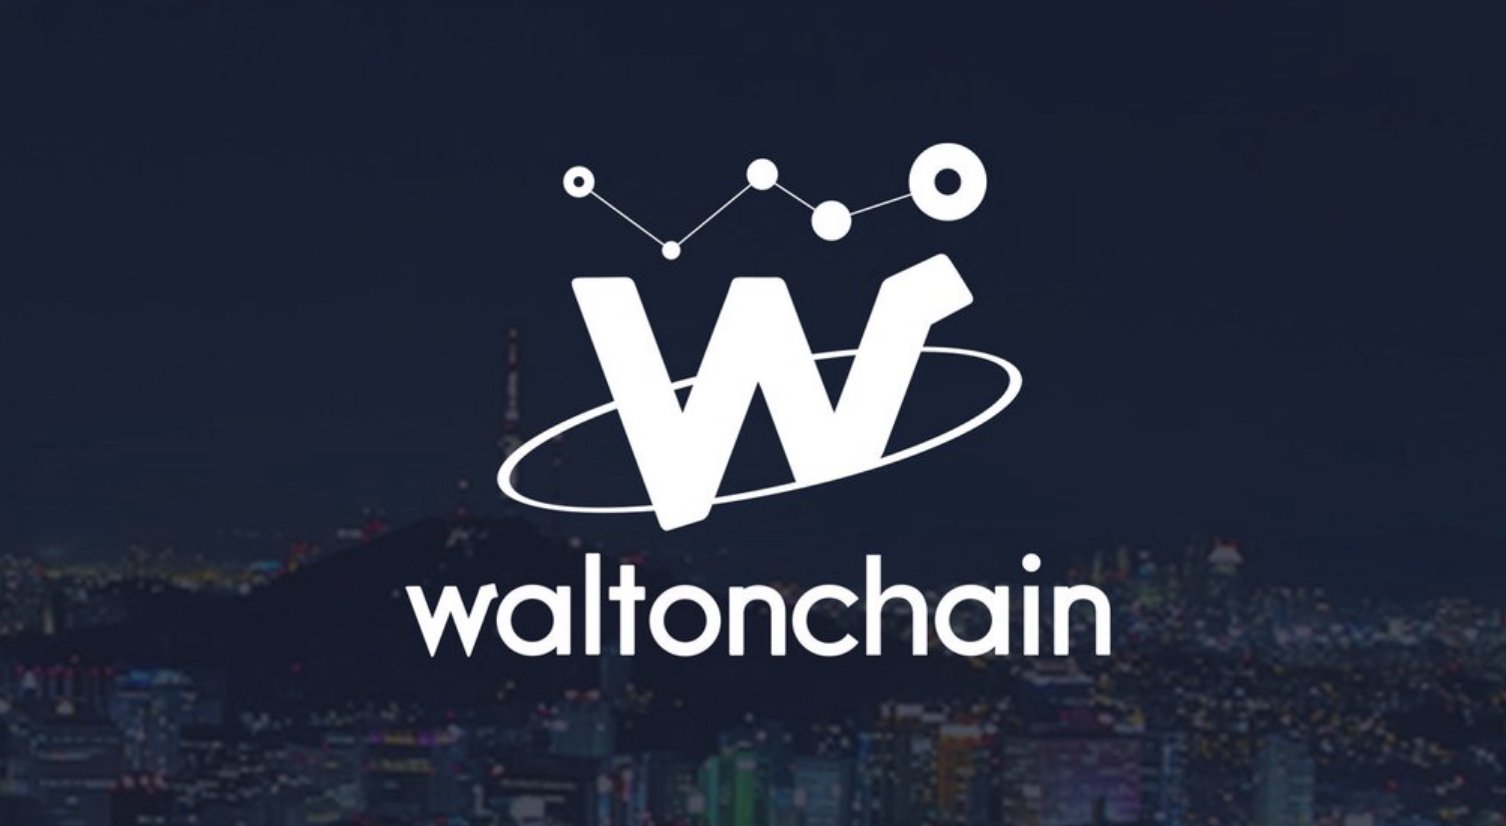 Chinas Pharma Scandal: Waltonchain (WTC) Provides Free Traceability Solutions For Vaccines